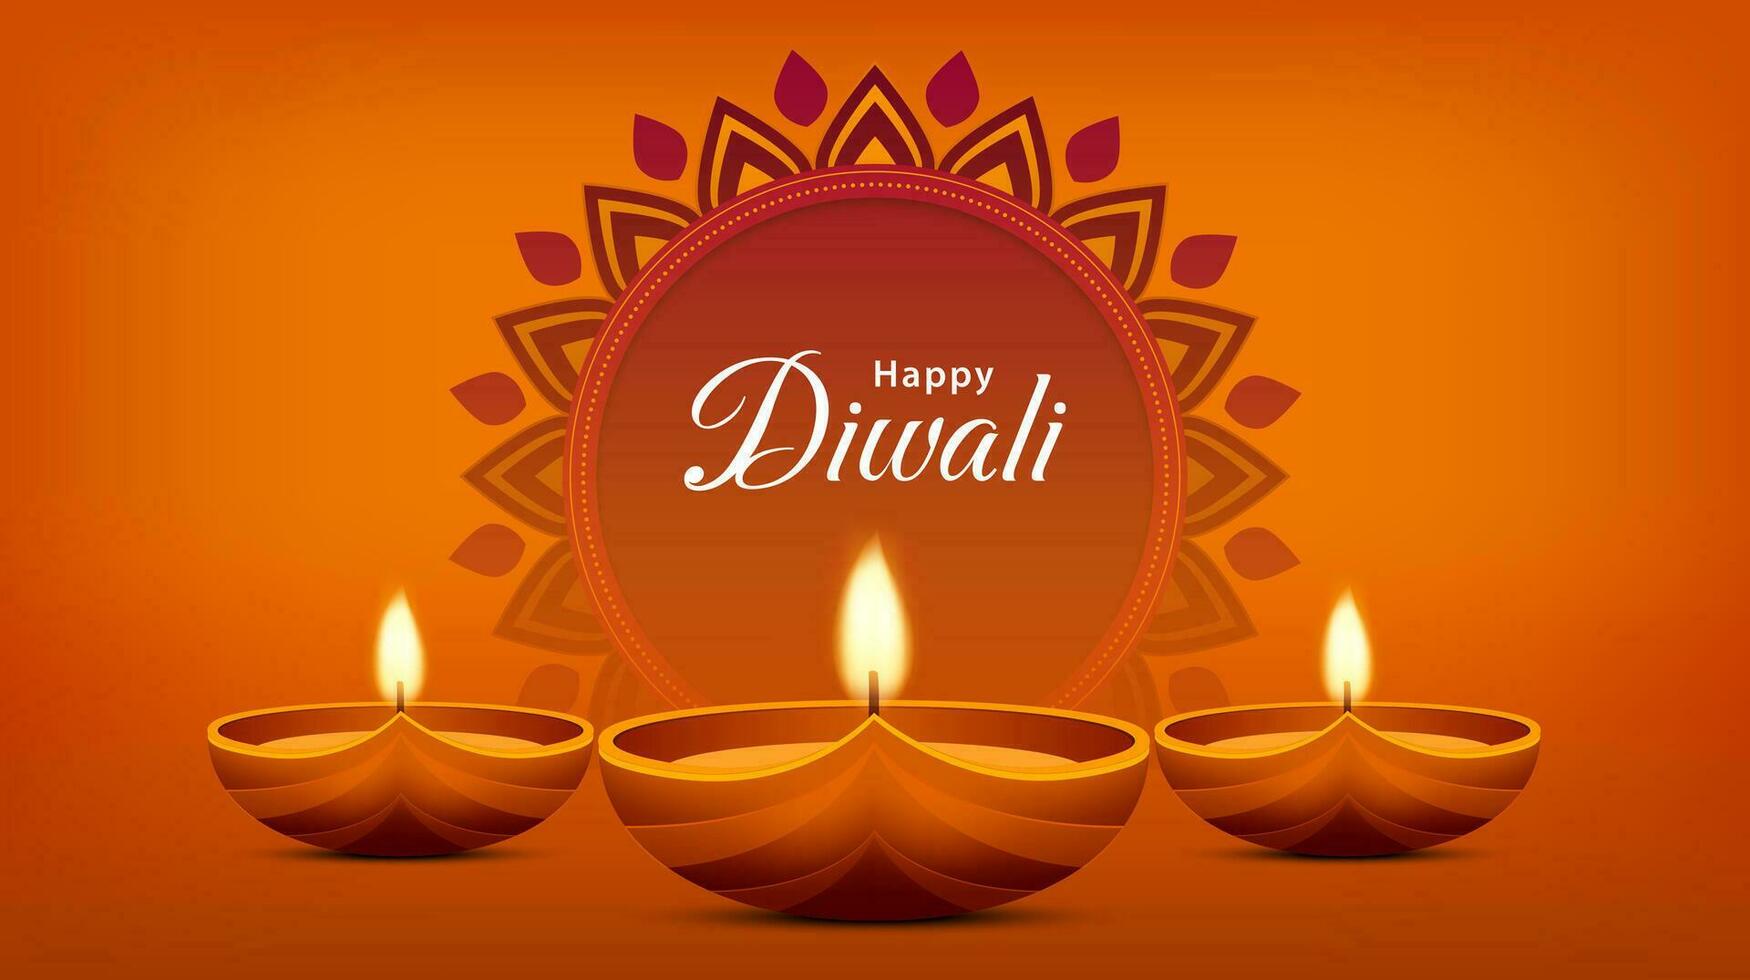 Happy diwali celebration background. Festival of lights banner with illuminated oil lamps decoration. Holiday greeting card. Vector illustration